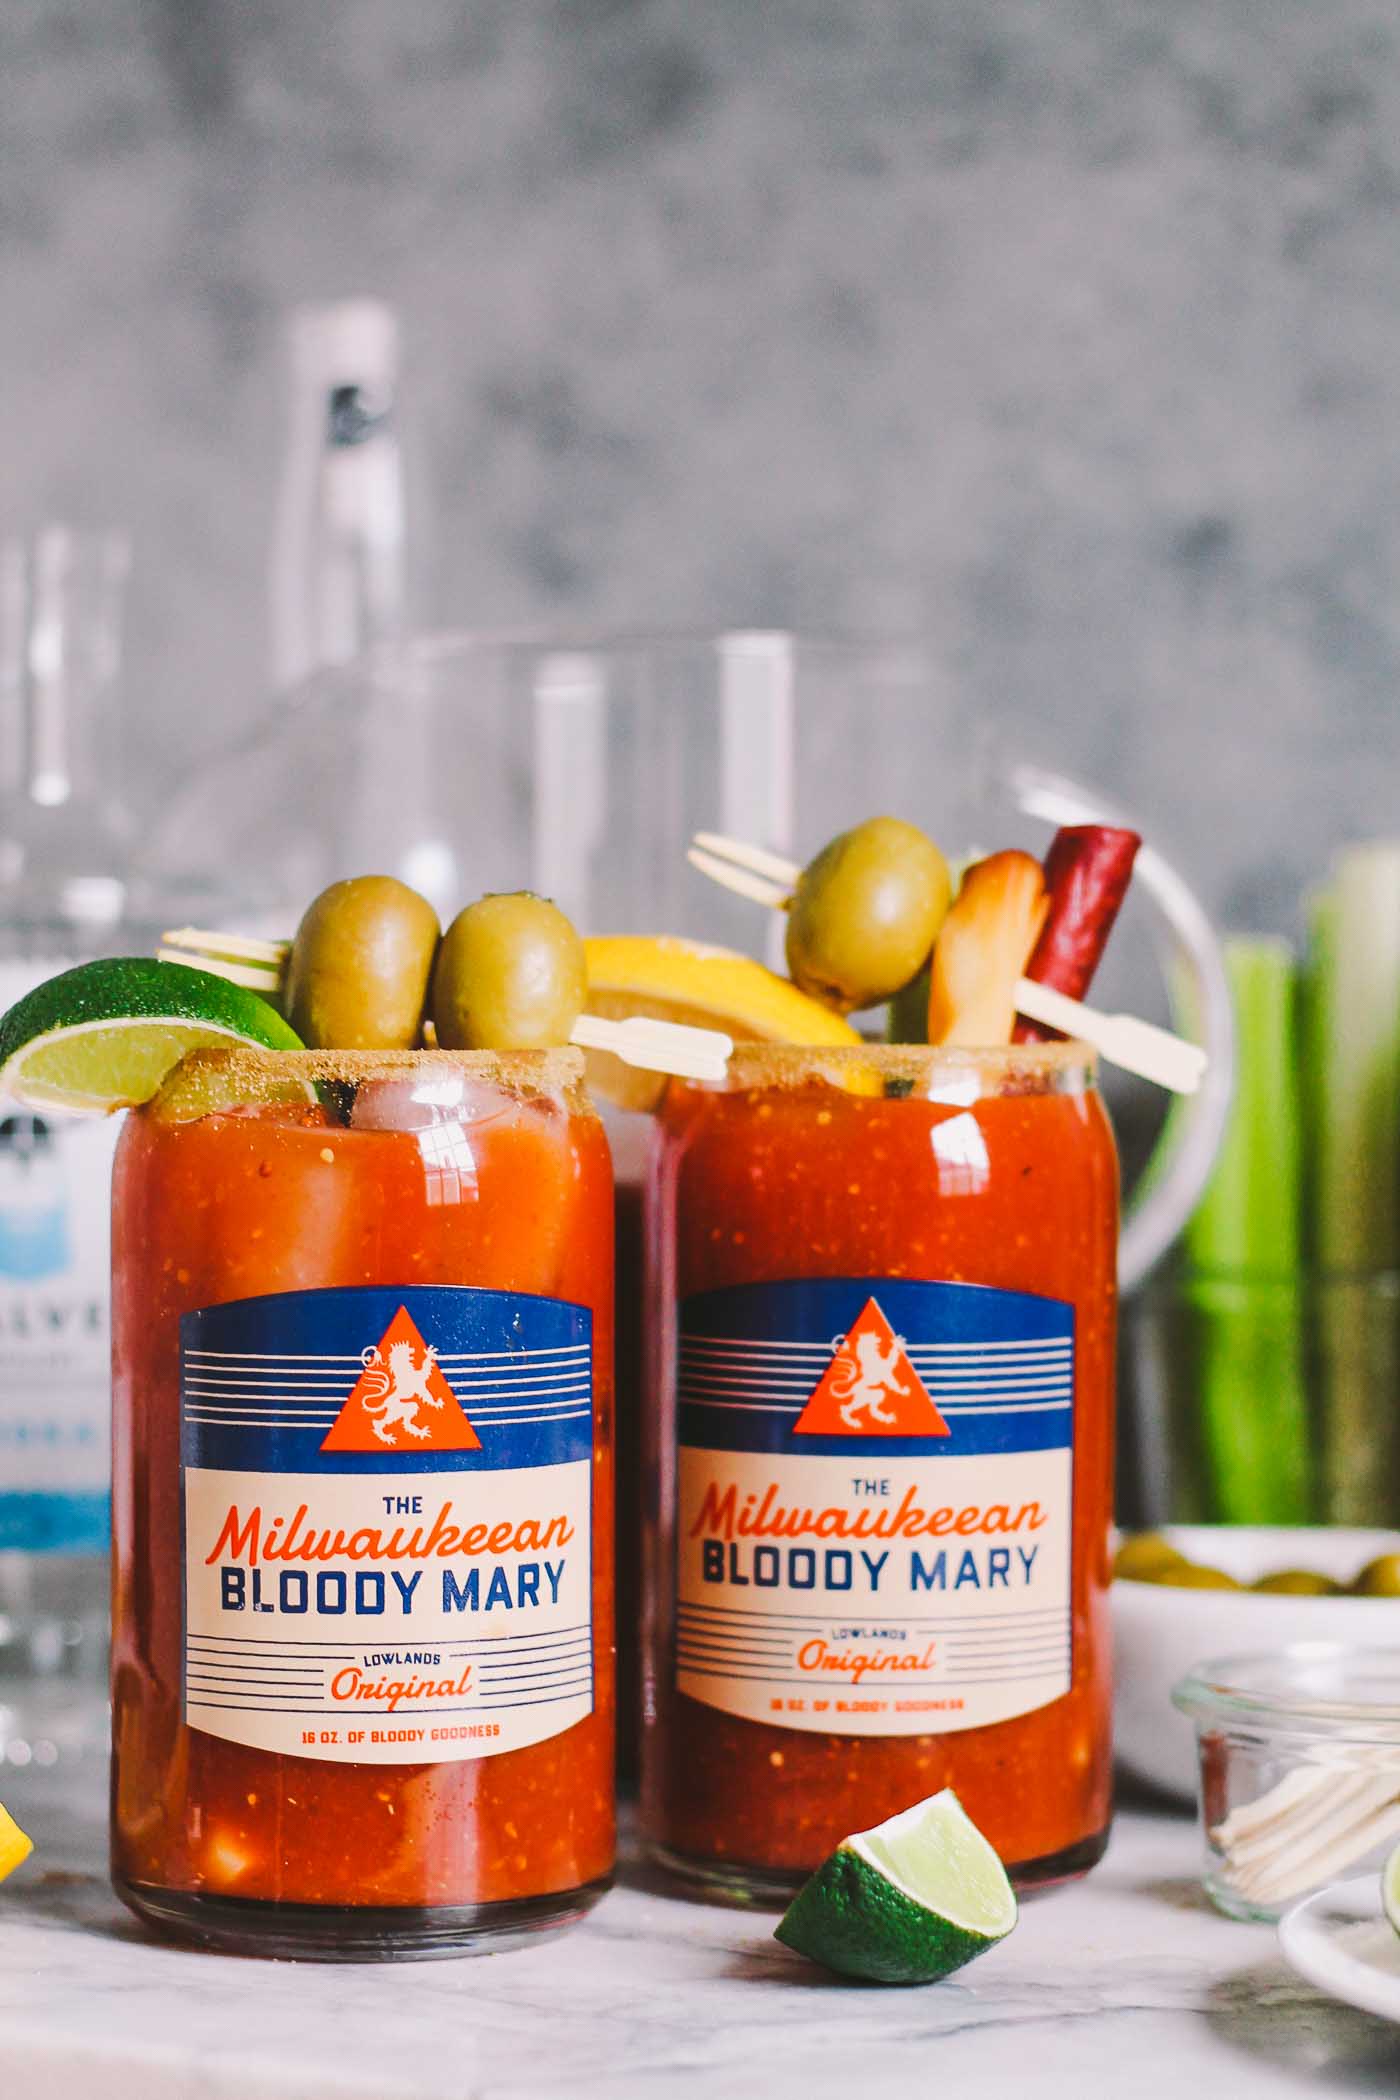 Best Bloody Marys Tips For A Diy Bloody Mary Bar Plays Well With Butter,Best Sheets To Buy To Keep Cool